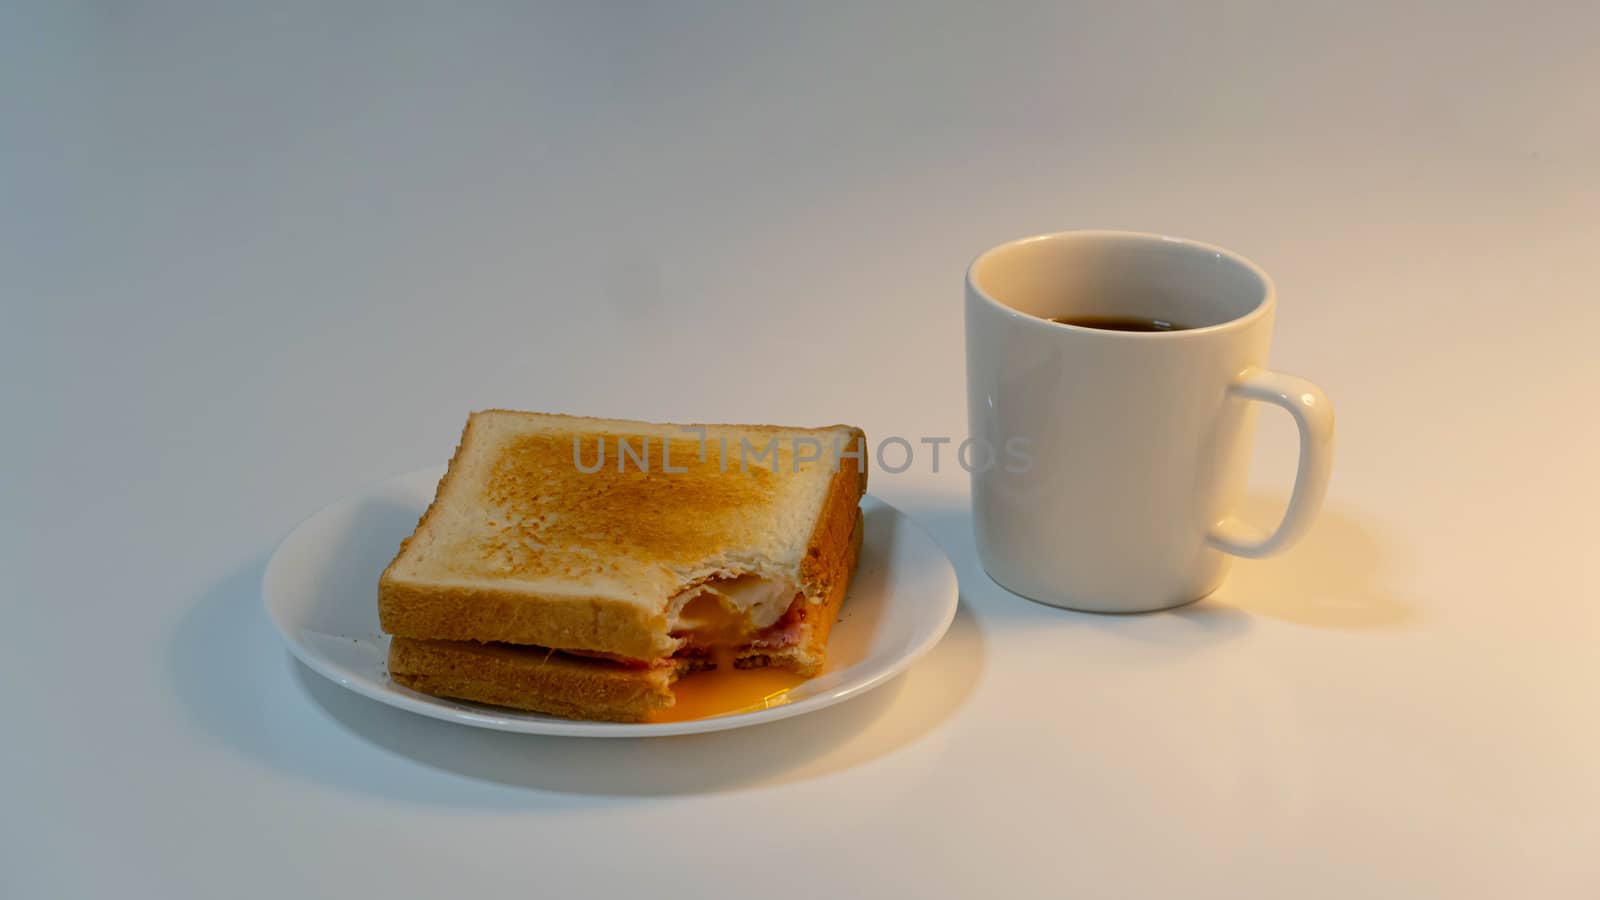 Toast and cup of coffee on white background by uphotopia